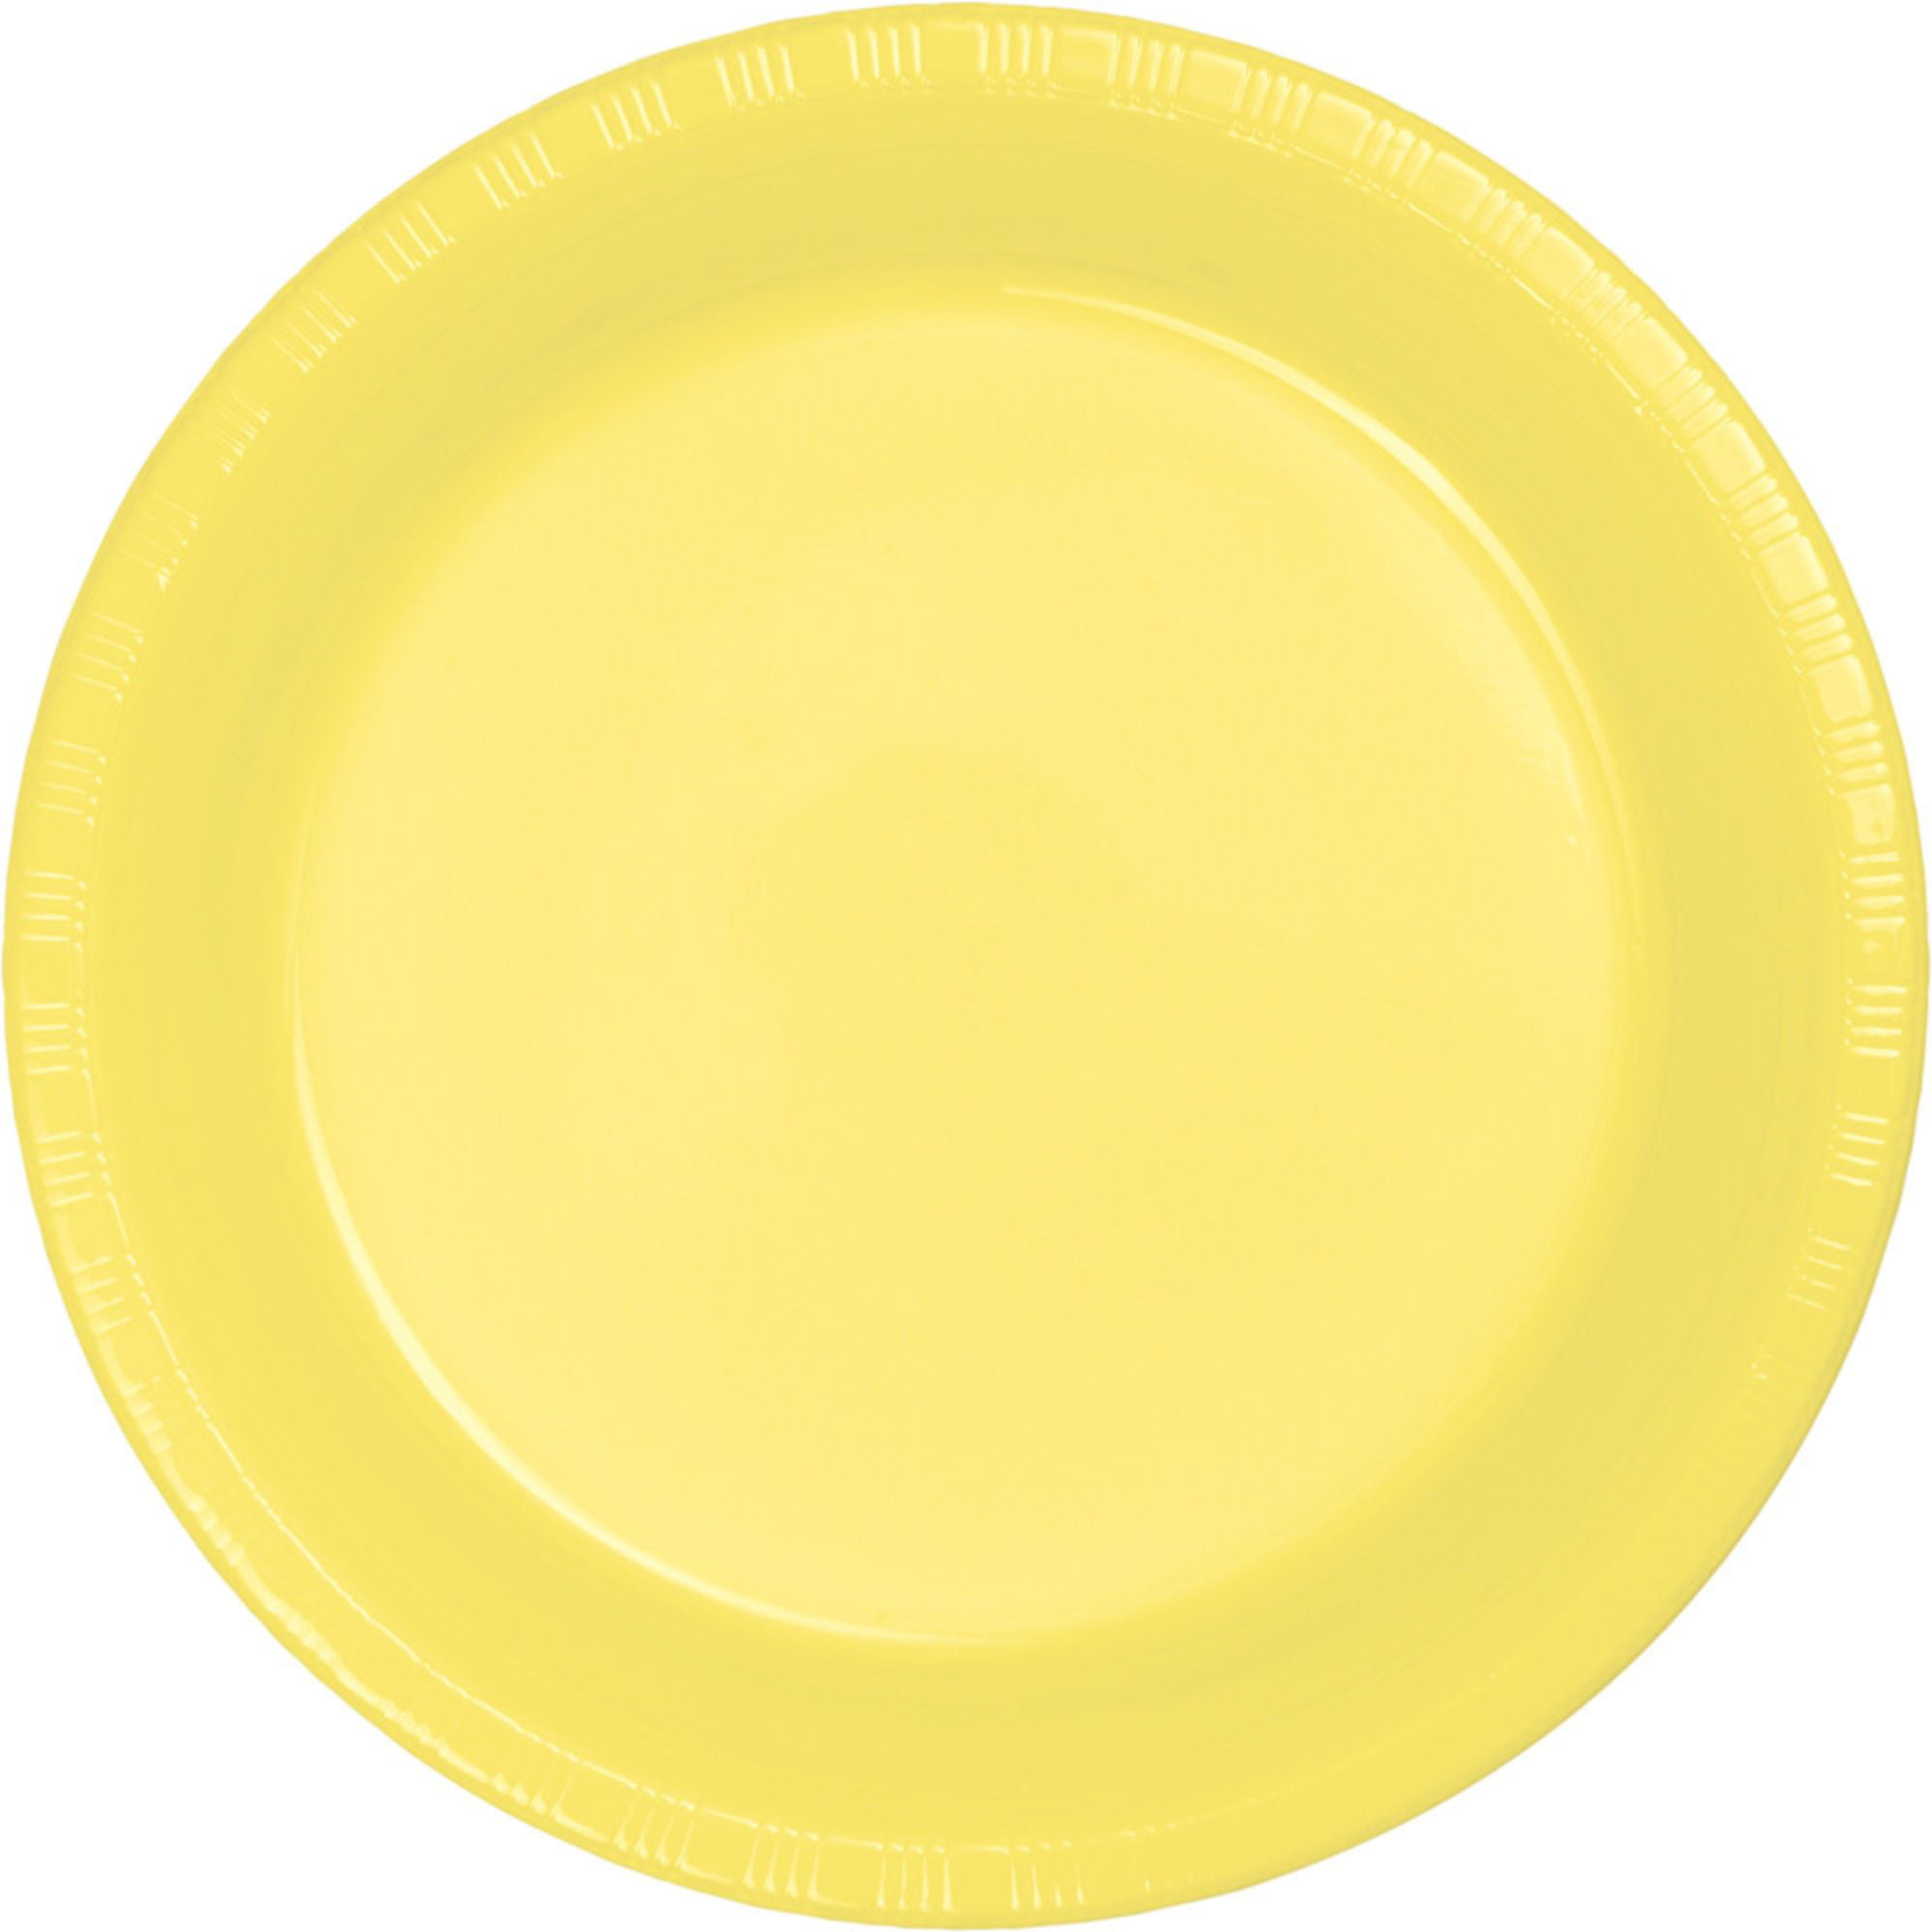 Details about   Graduation Dinner Plates Oval Large 8ct Yellow Decoration Favor Party Supplies 